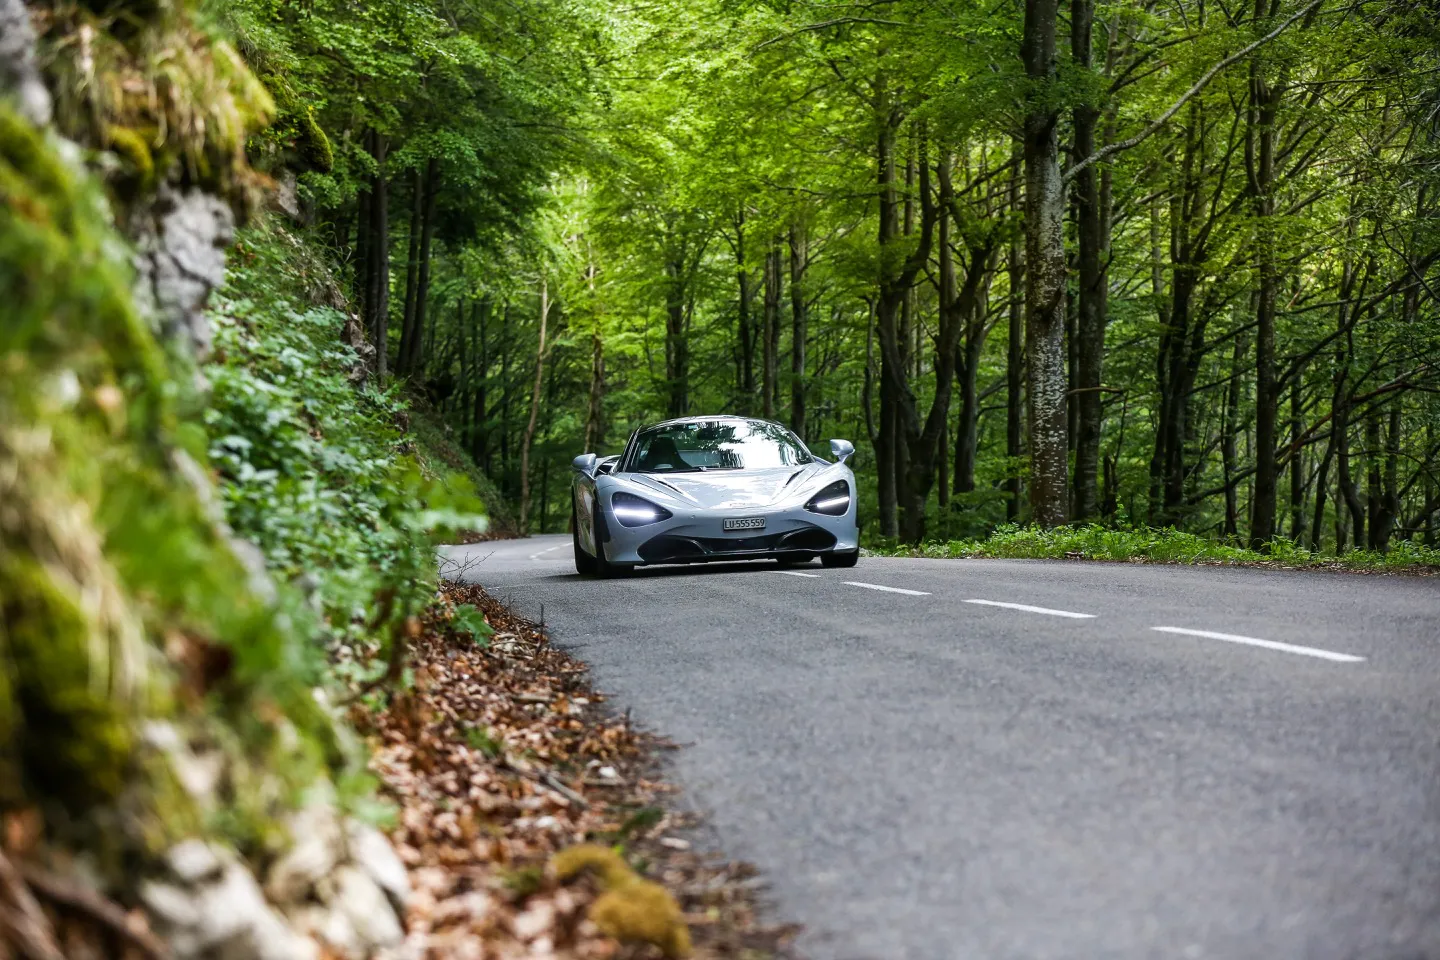 Choose from McLaren, Lamborghini, Ferrari and more on the best stay and drive holiday in Europe